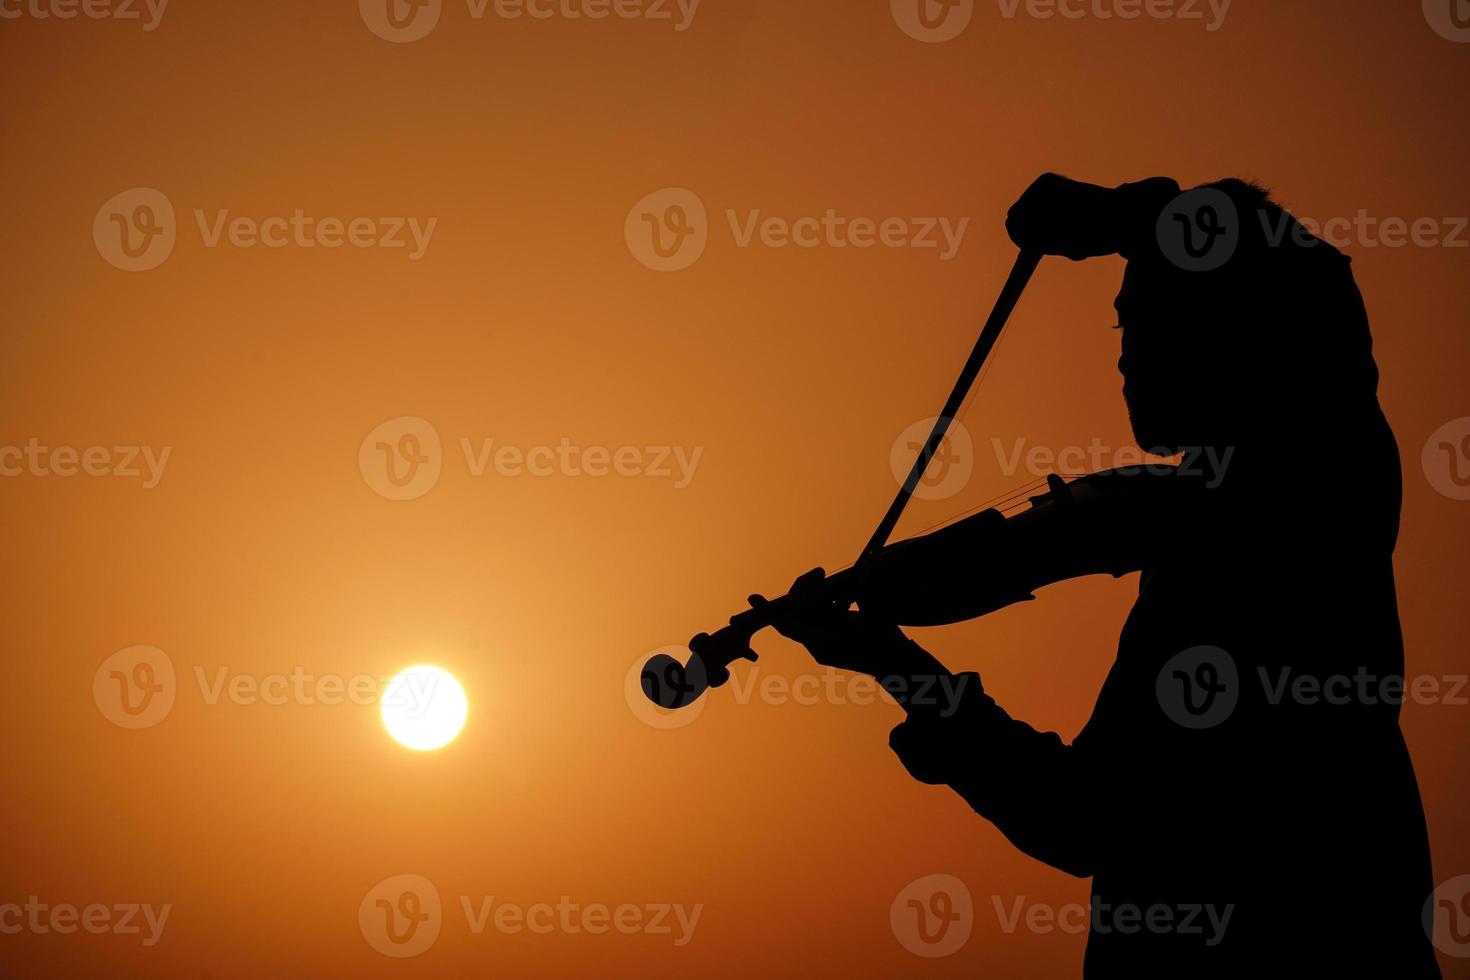 musician playing violin. Music and musical tone concept. silhouette images of man musician photo